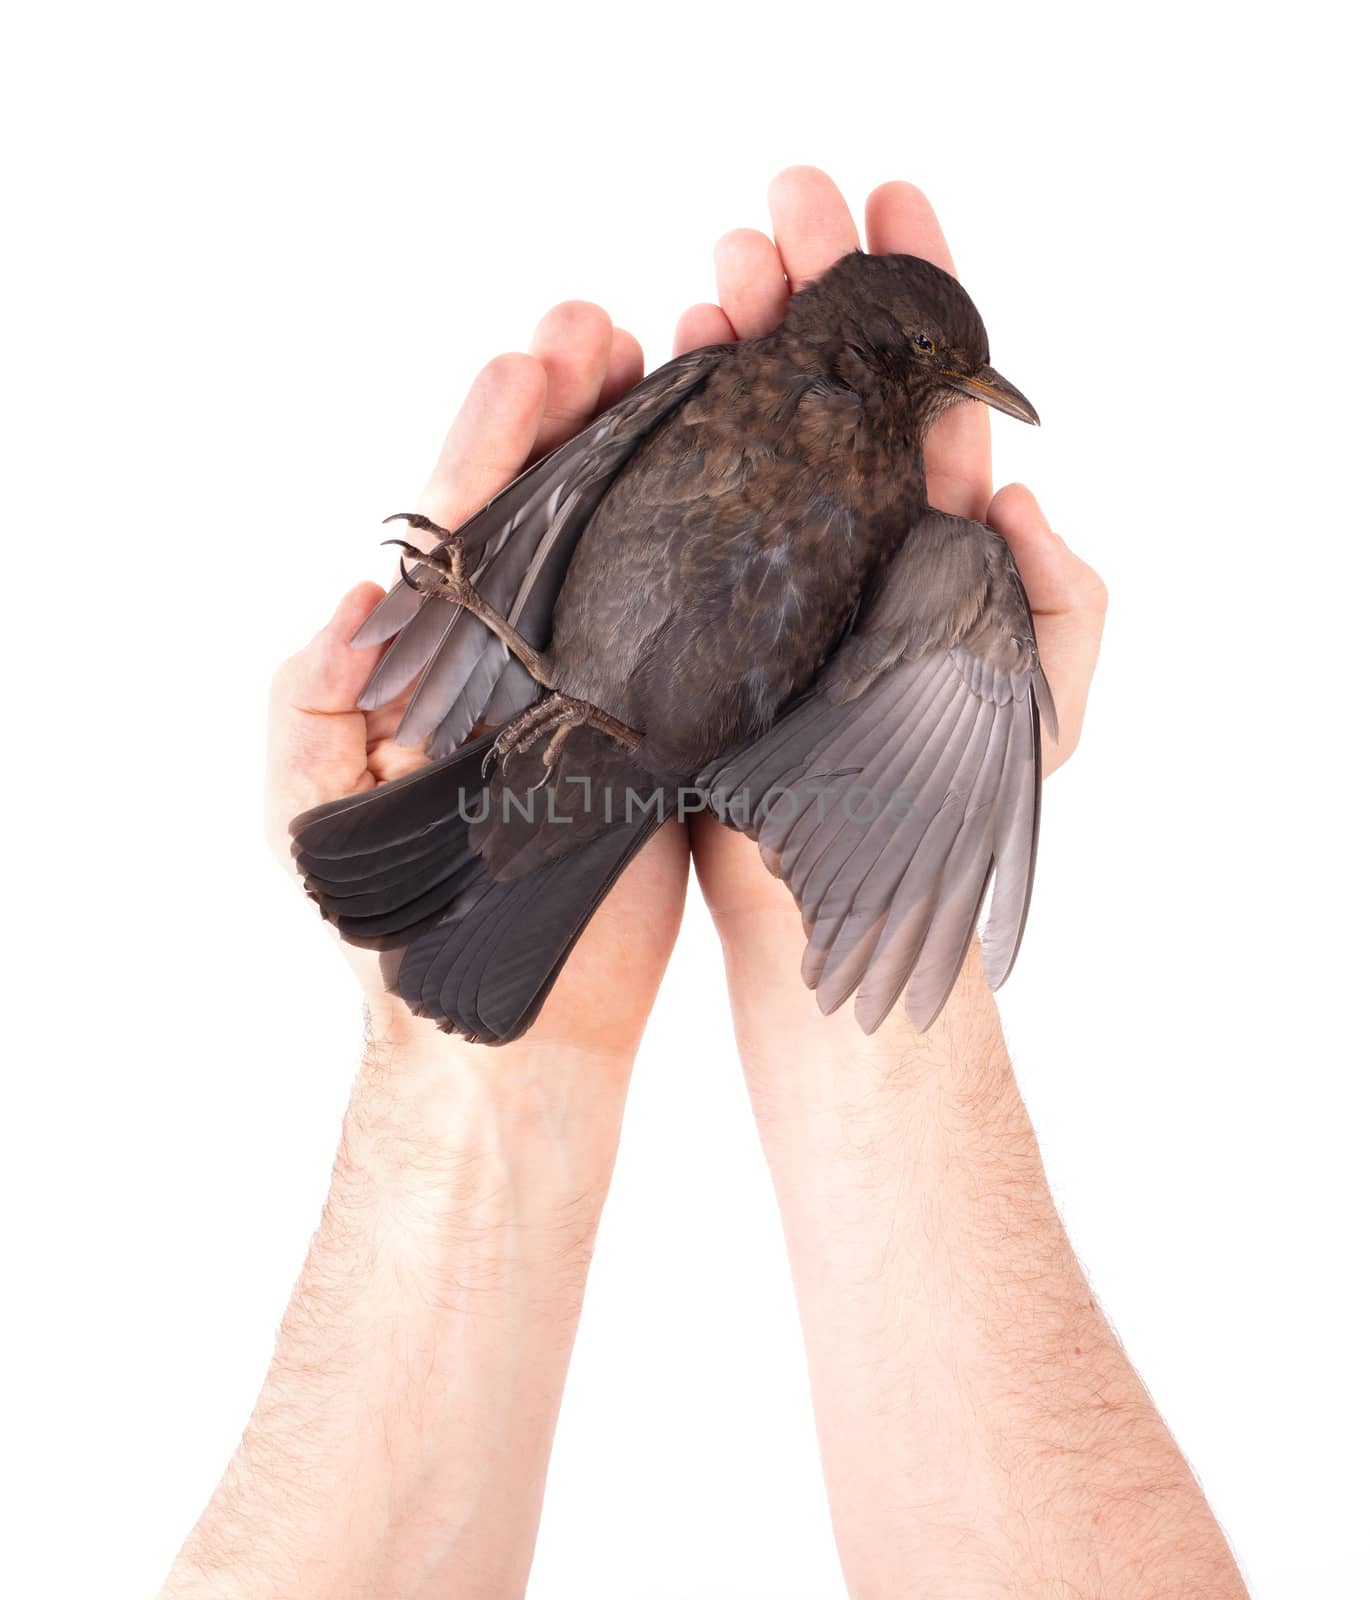 Adult holding a dead blackbird isolated on a white background